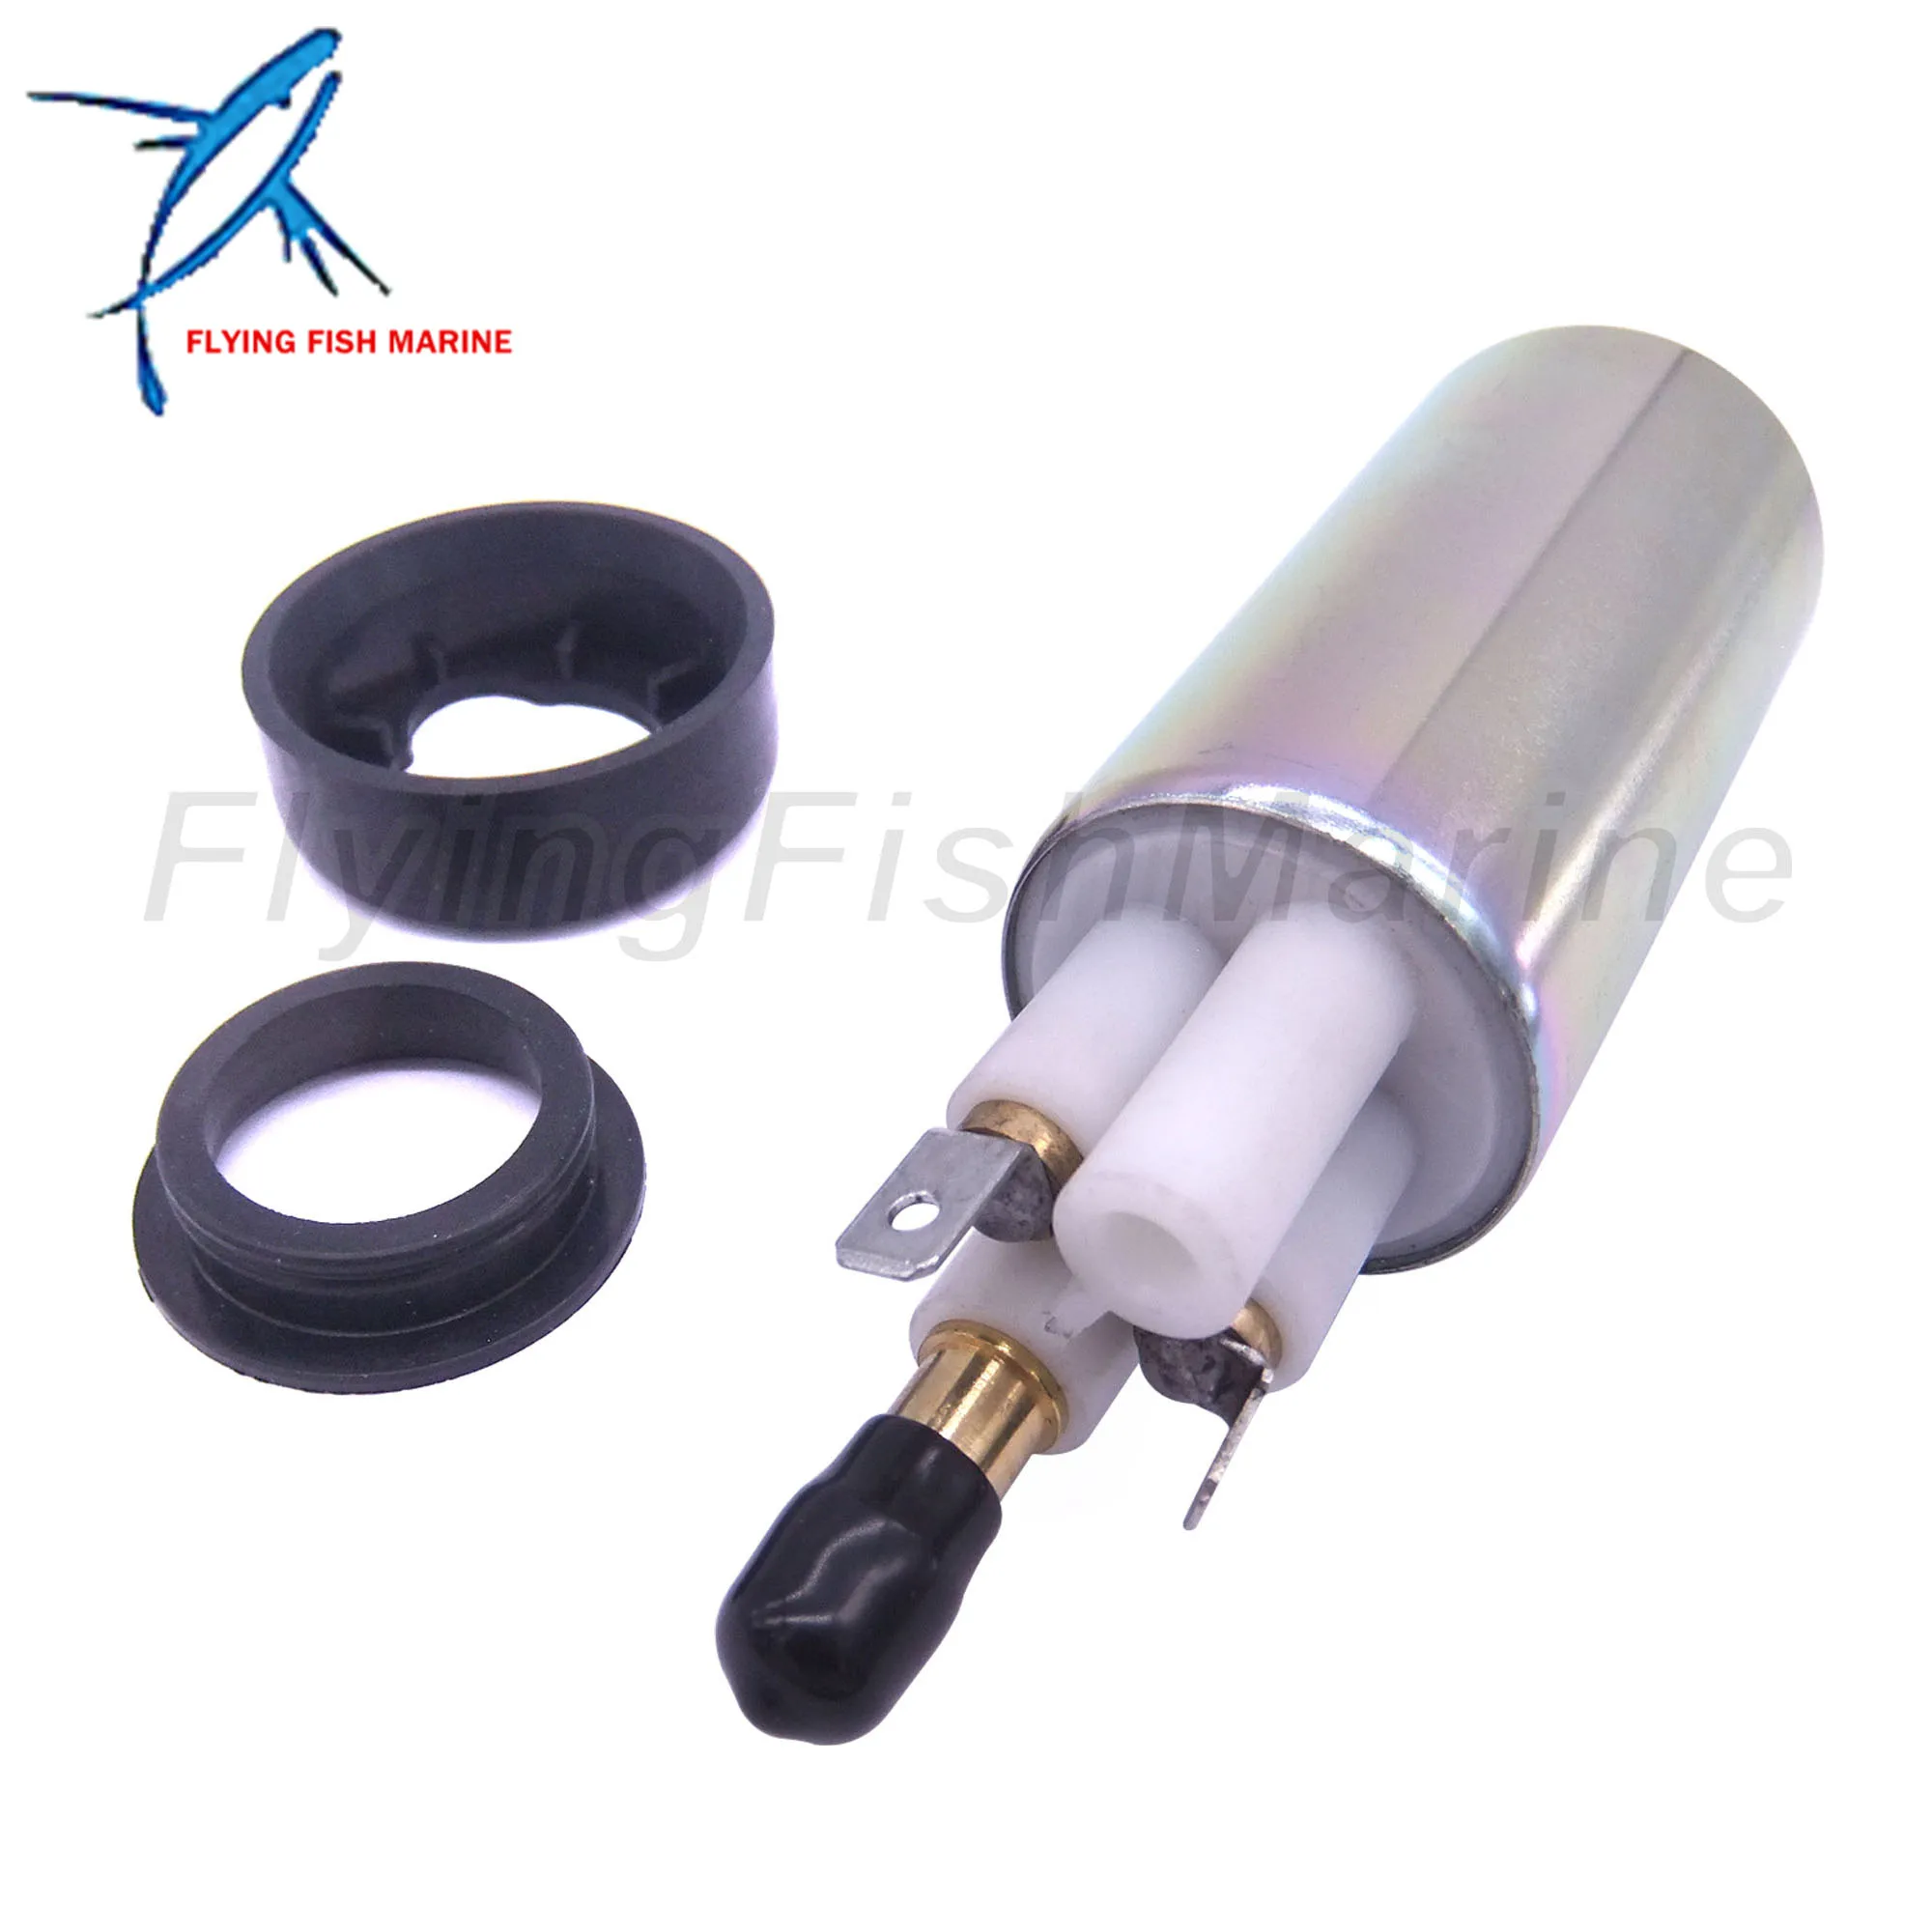 

880596T58 Electric Fuel Pump Lift for Mercury Mariner Boat Motor 75HP-350HP Outboard Engine